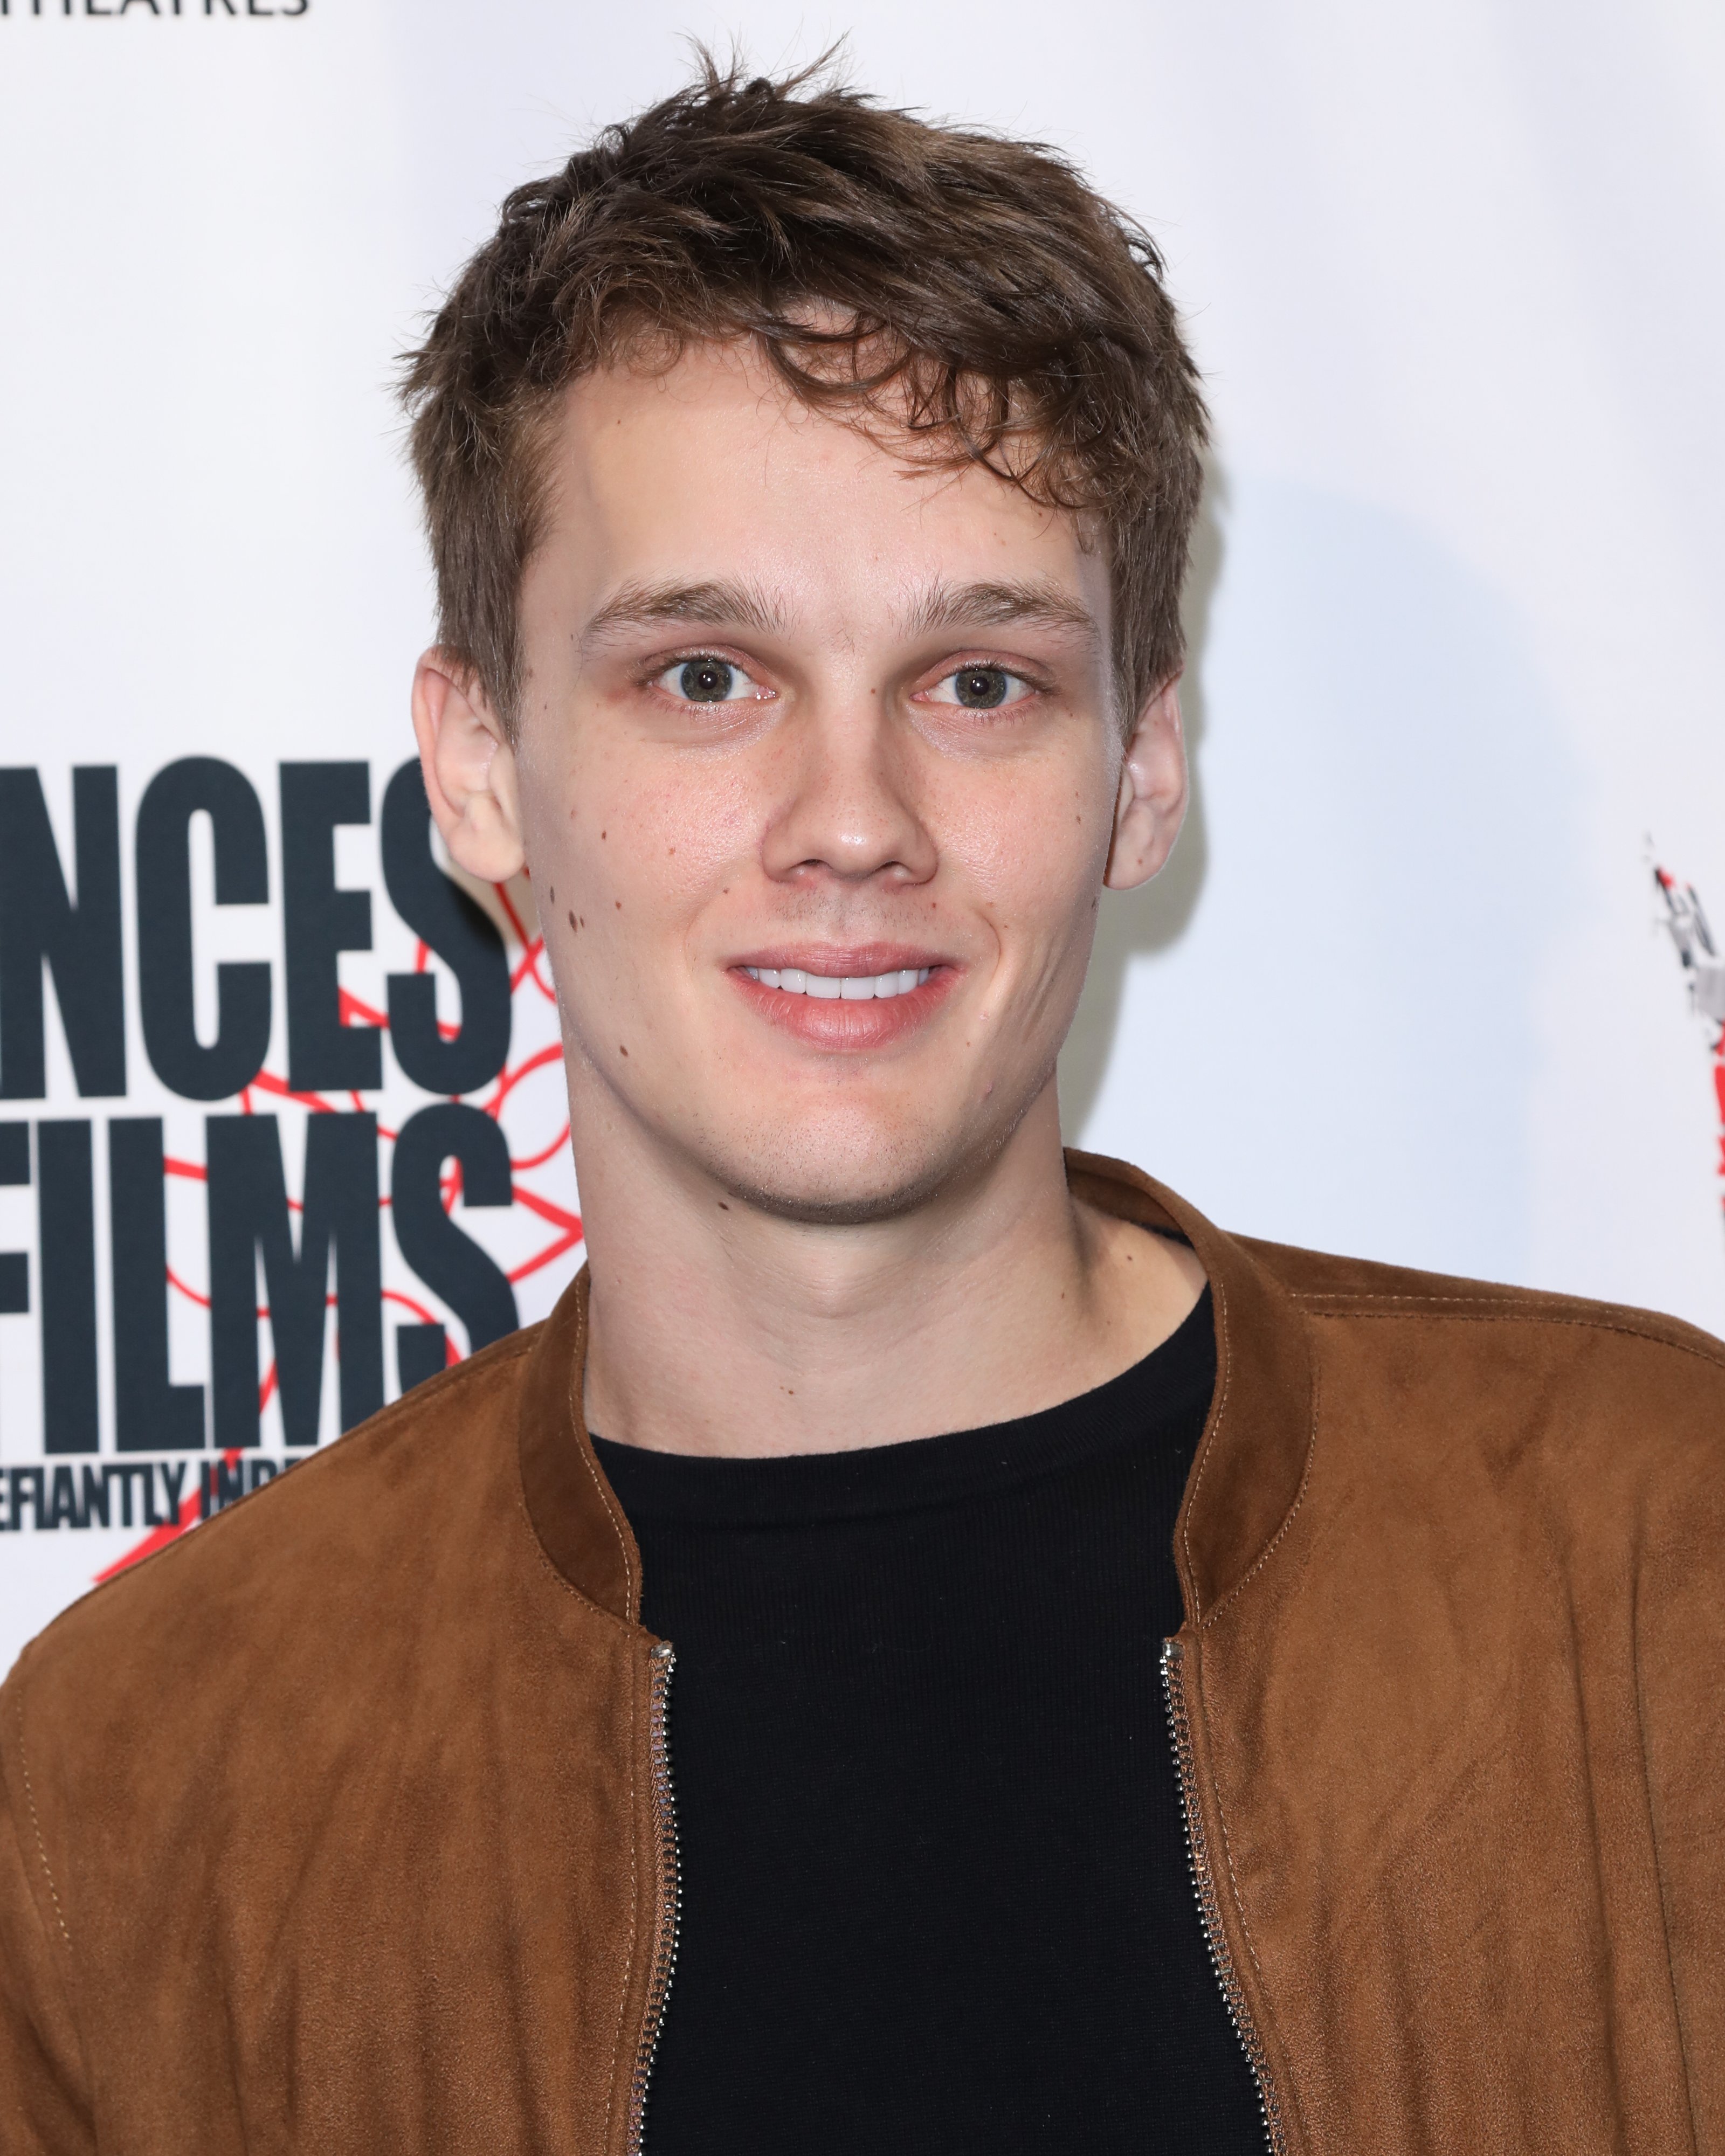 Actor Hunter Doohan attends the premiere of "Where We Disappear" at the 2019 Dances With Films Festival at TCL Chinese Theatre IMAX on June 21, 2019, in Hollywood, California. | Source: Getty Images